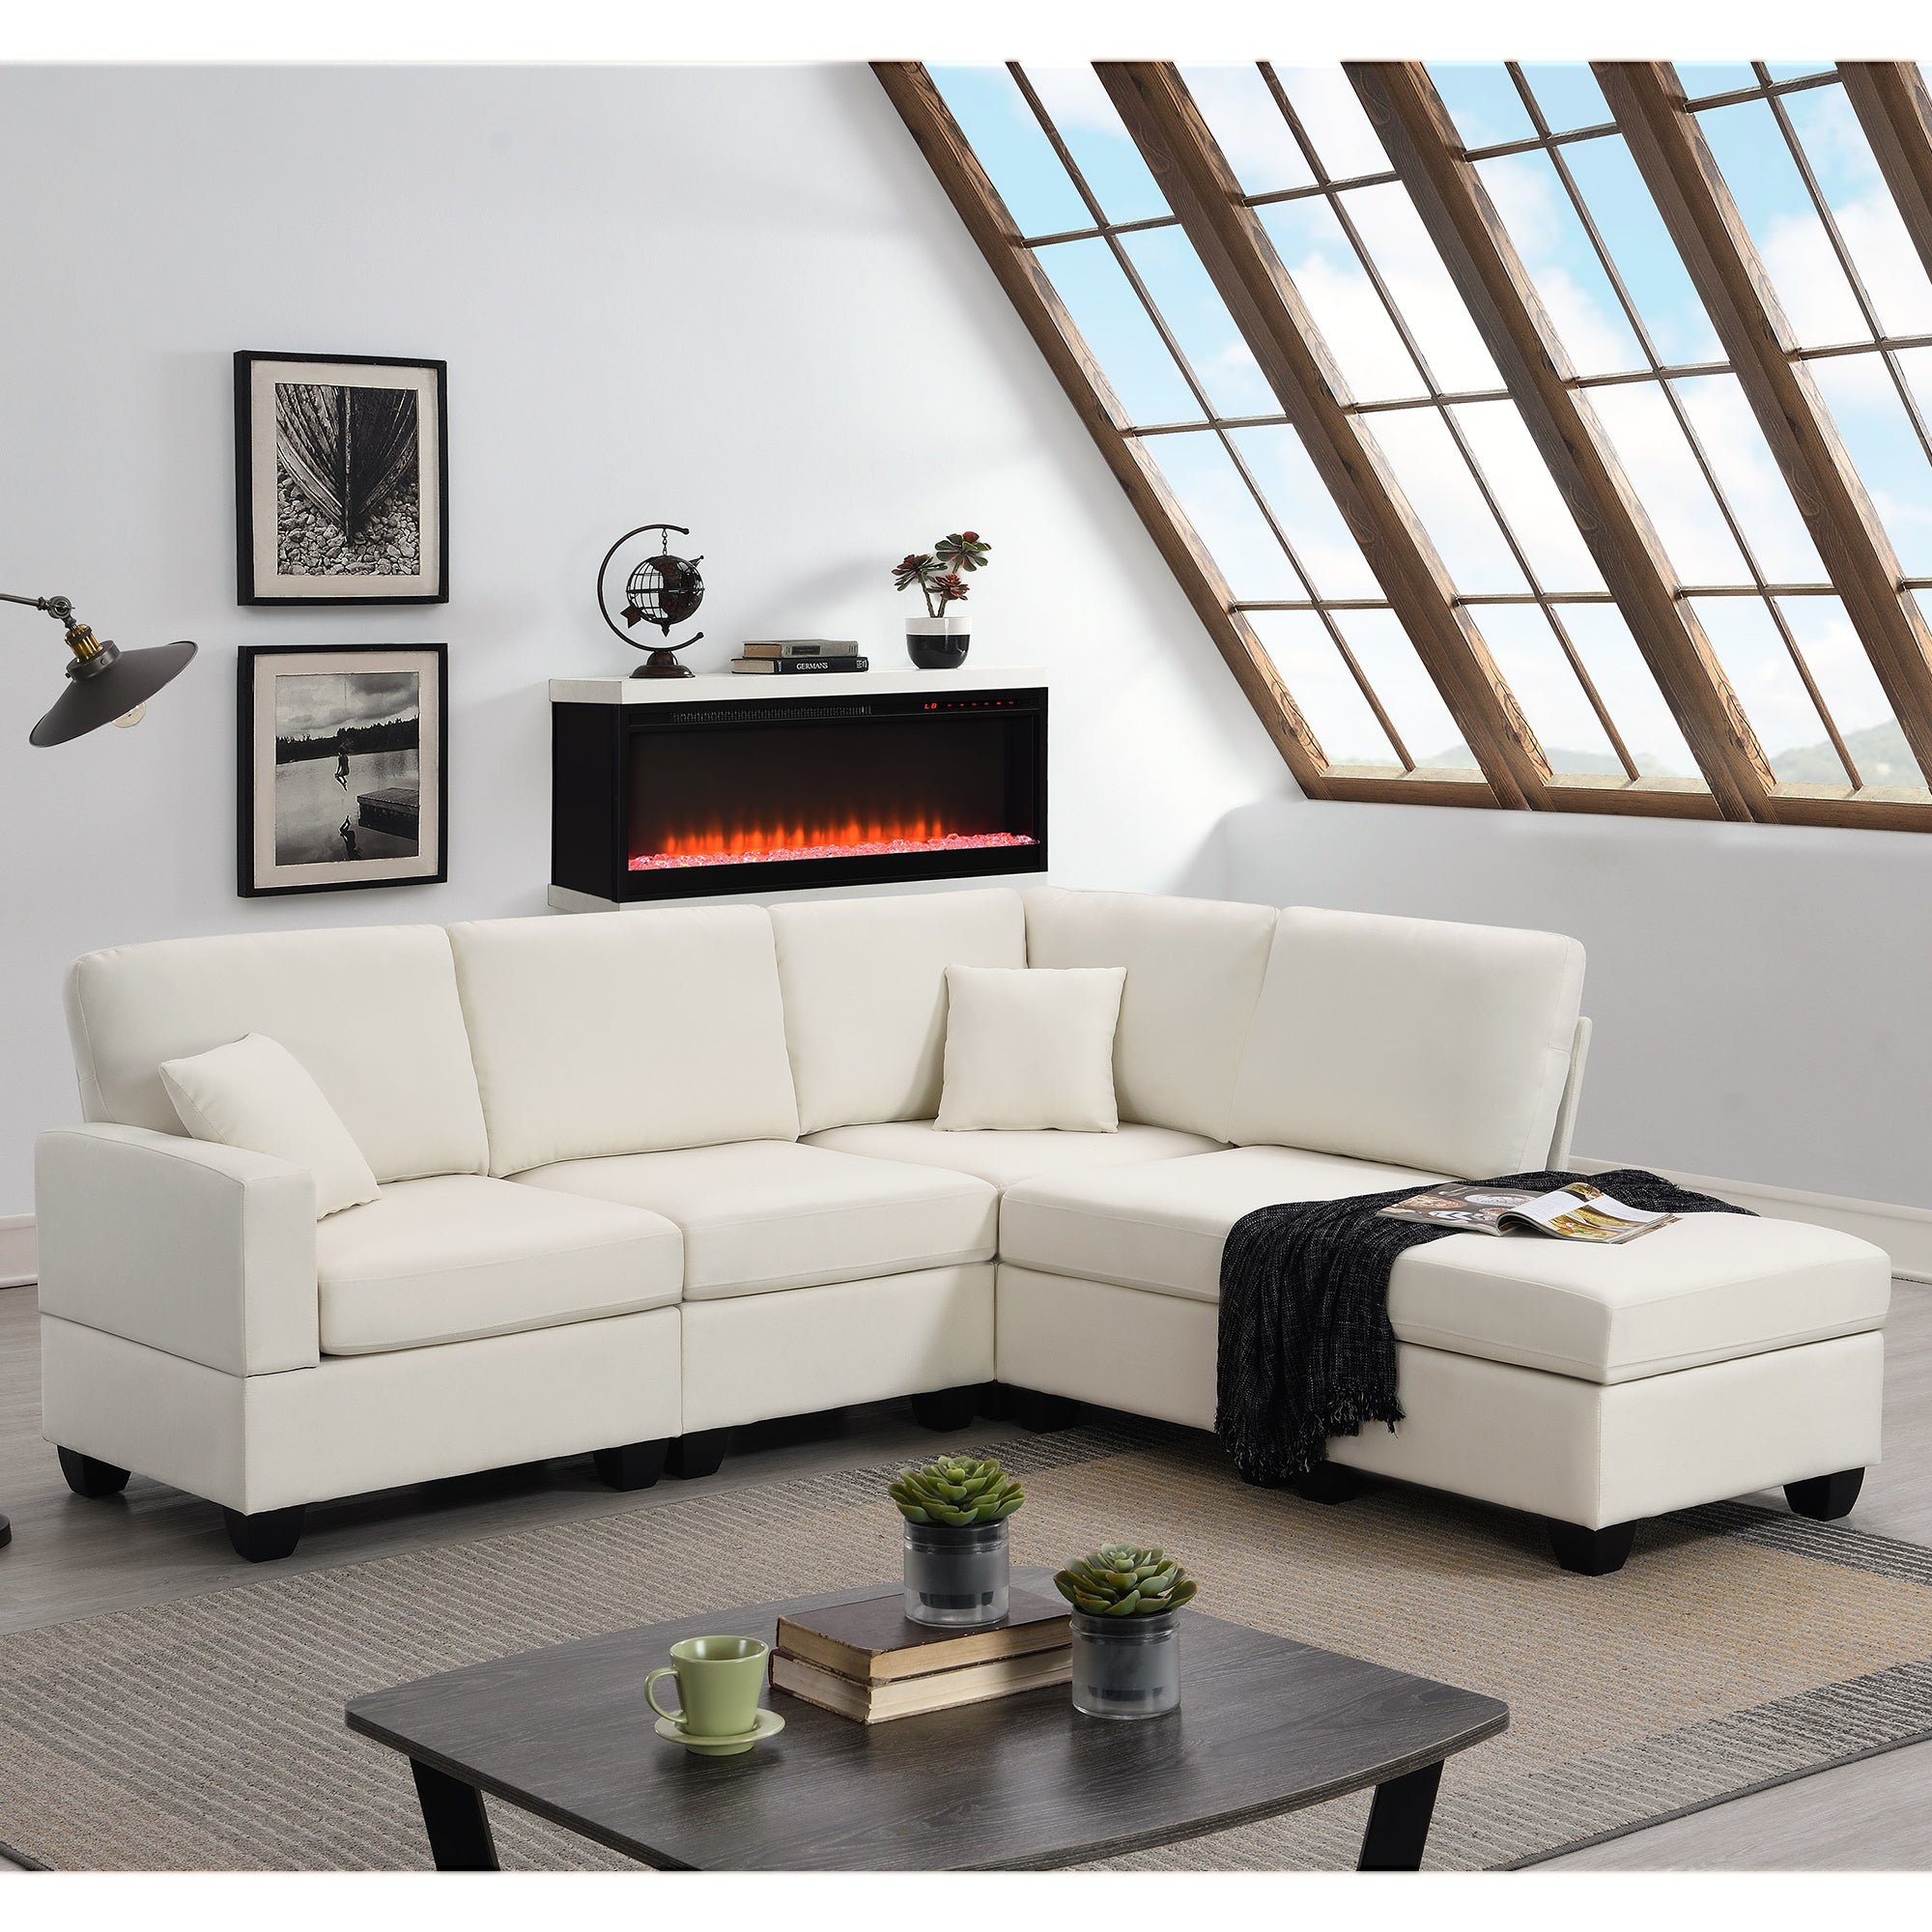 Bellemave 90" Modern L-Shape Sectional Sofa,5-Seat Modular Couch Set with Convertible Ottoman and 2 Pillows